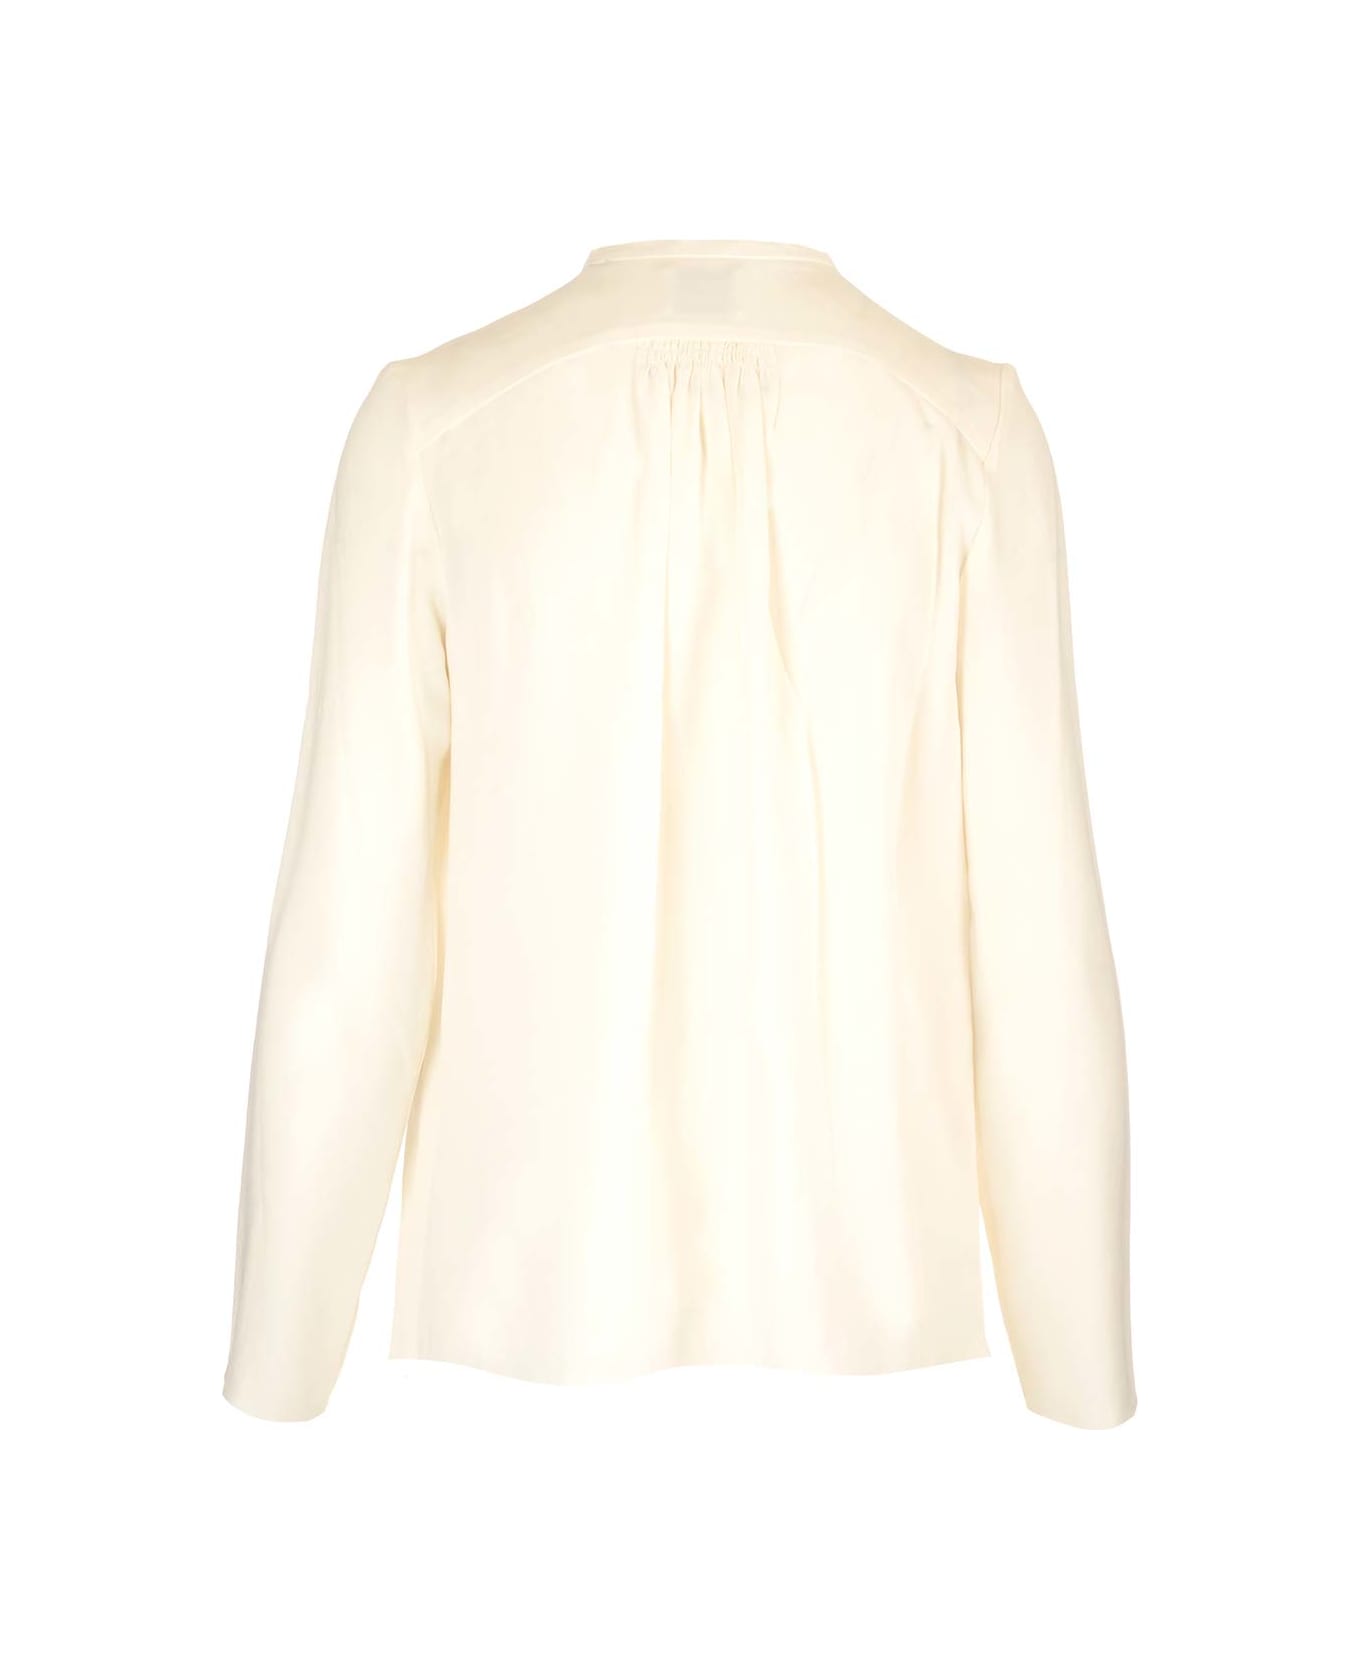 Isabel Marant Blouse With Ruffles - Ecru ブラウス